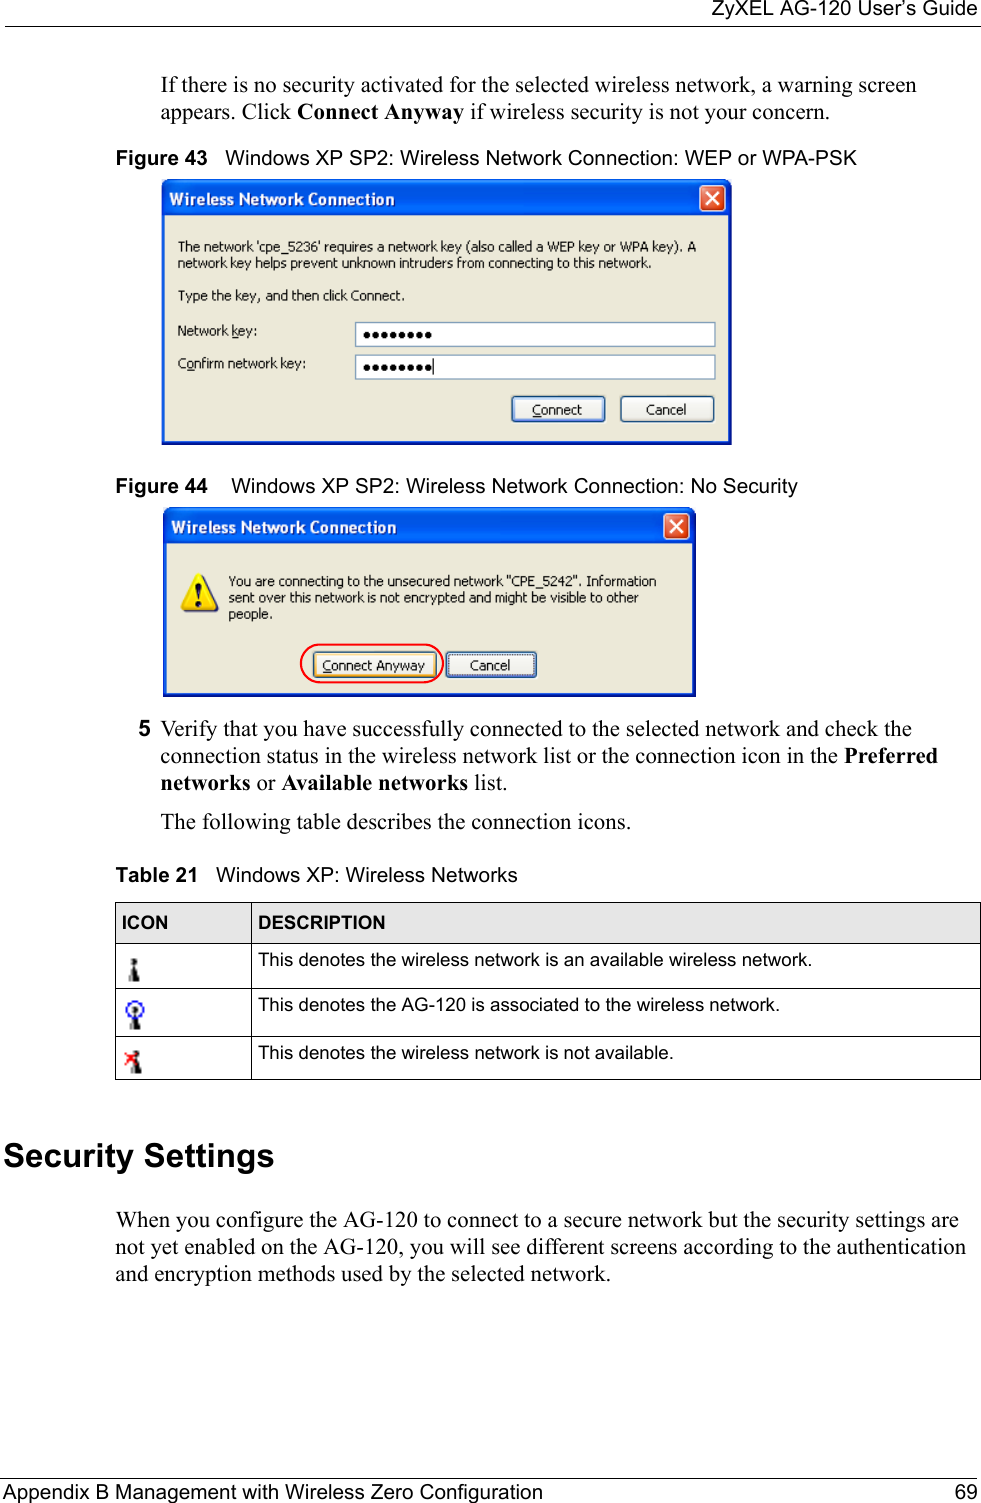 ZyXEL AG-120 User’s GuideAppendix B Management with Wireless Zero Configuration 69If there is no security activated for the selected wireless network, a warning screen appears. Click Connect Anyway if wireless security is not your concern.Figure 43   Windows XP SP2: Wireless Network Connection: WEP or WPA-PSKFigure 44    Windows XP SP2: Wireless Network Connection: No Security5Verify that you have successfully connected to the selected network and check the connection status in the wireless network list or the connection icon in the Preferred networks or Available networks list.The following table describes the connection icons.Security SettingsWhen you configure the AG-120 to connect to a secure network but the security settings are not yet enabled on the AG-120, you will see different screens according to the authentication and encryption methods used by the selected network.Table 21   Windows XP: Wireless NetworksICON DESCRIPTIONThis denotes the wireless network is an available wireless network.This denotes the AG-120 is associated to the wireless network.This denotes the wireless network is not available.